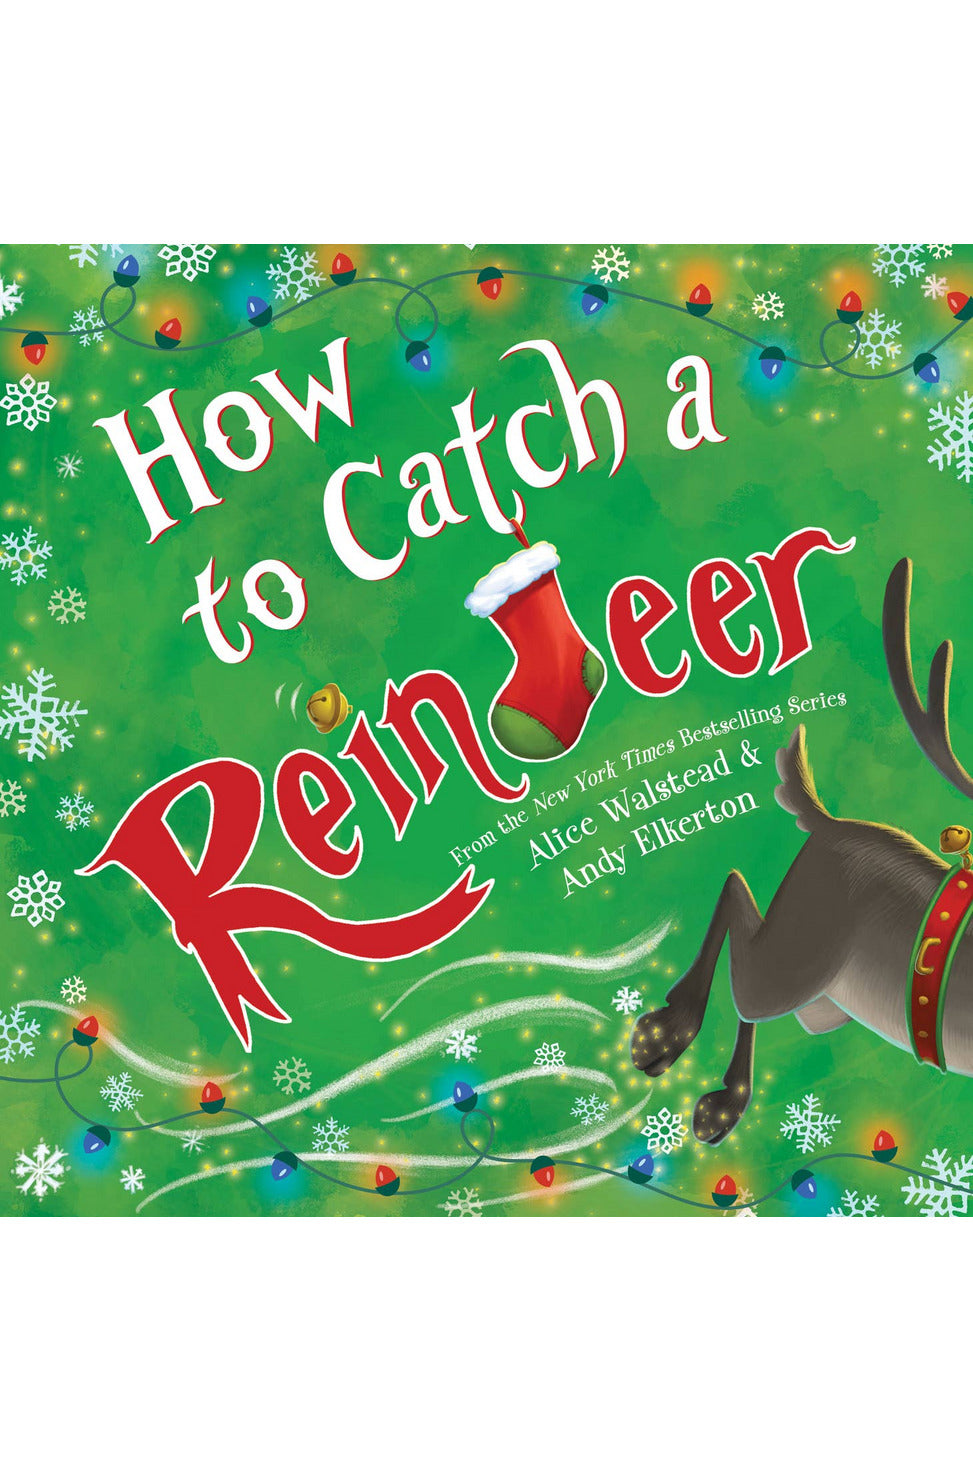 HOW TO CATCH A REINDEER